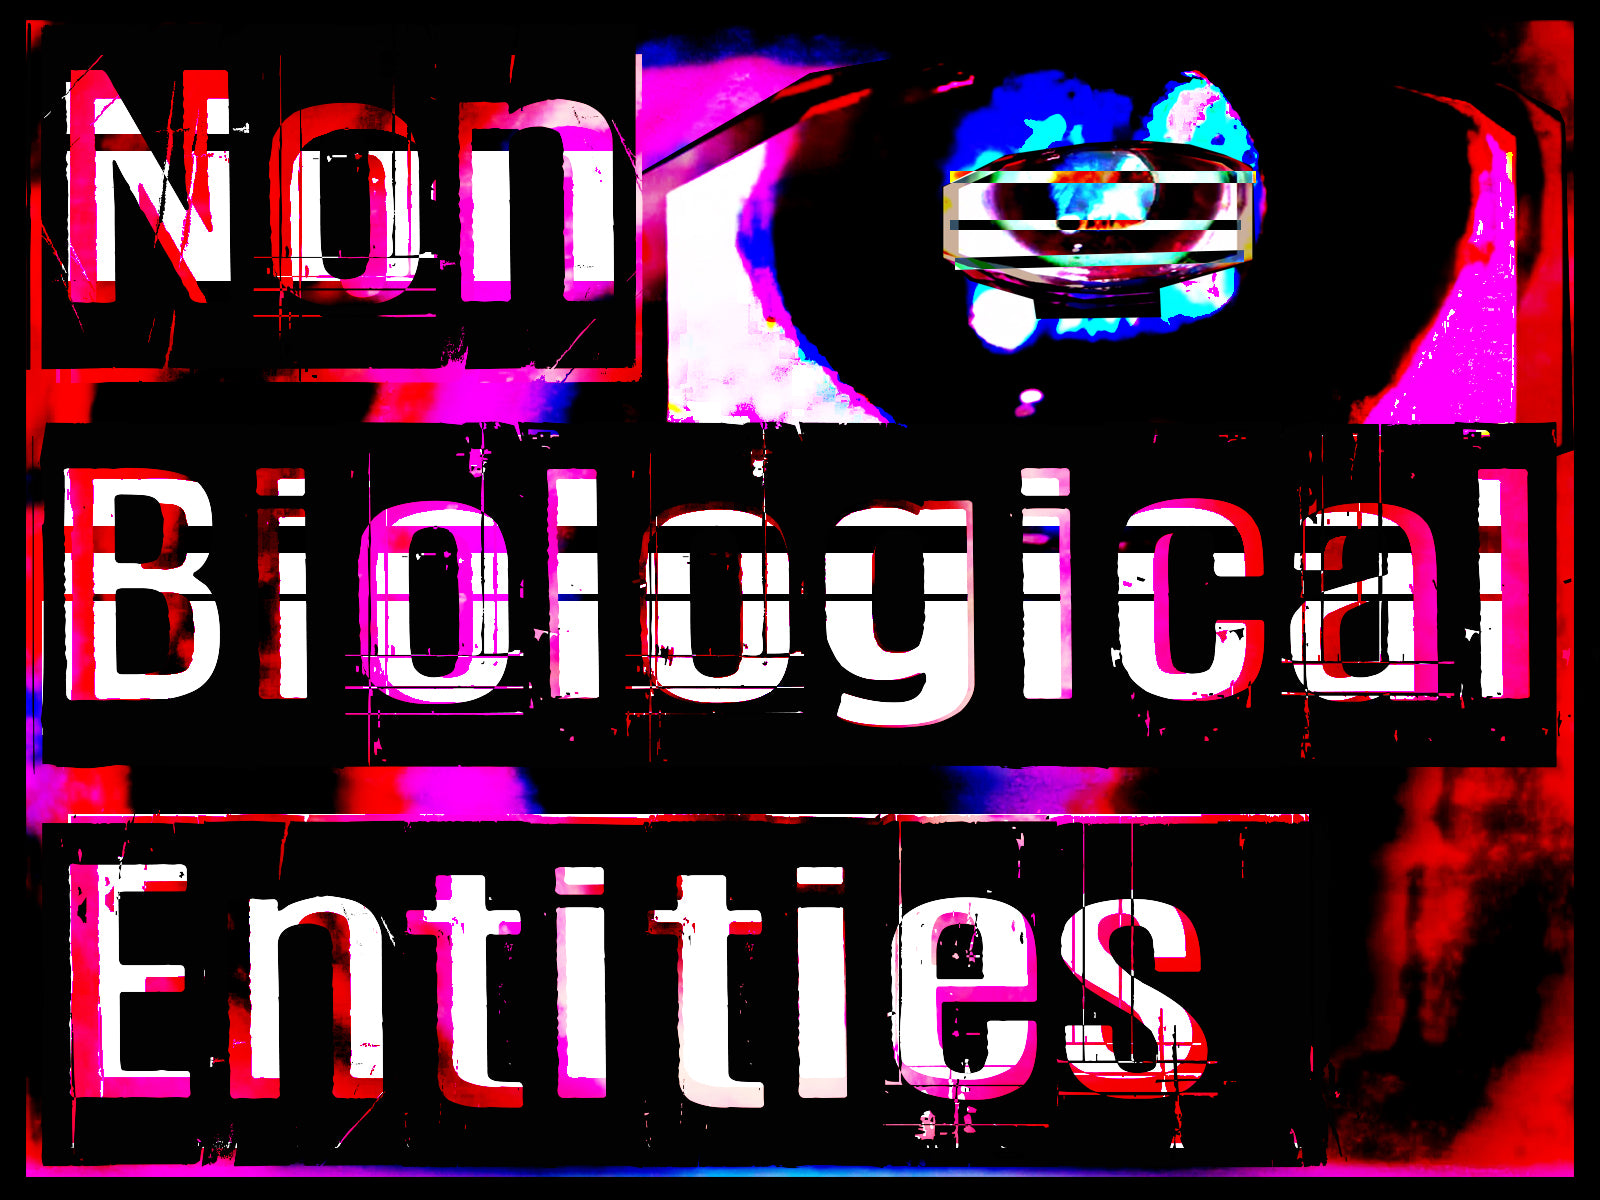 NON BIOLOGICAL ENTITIES